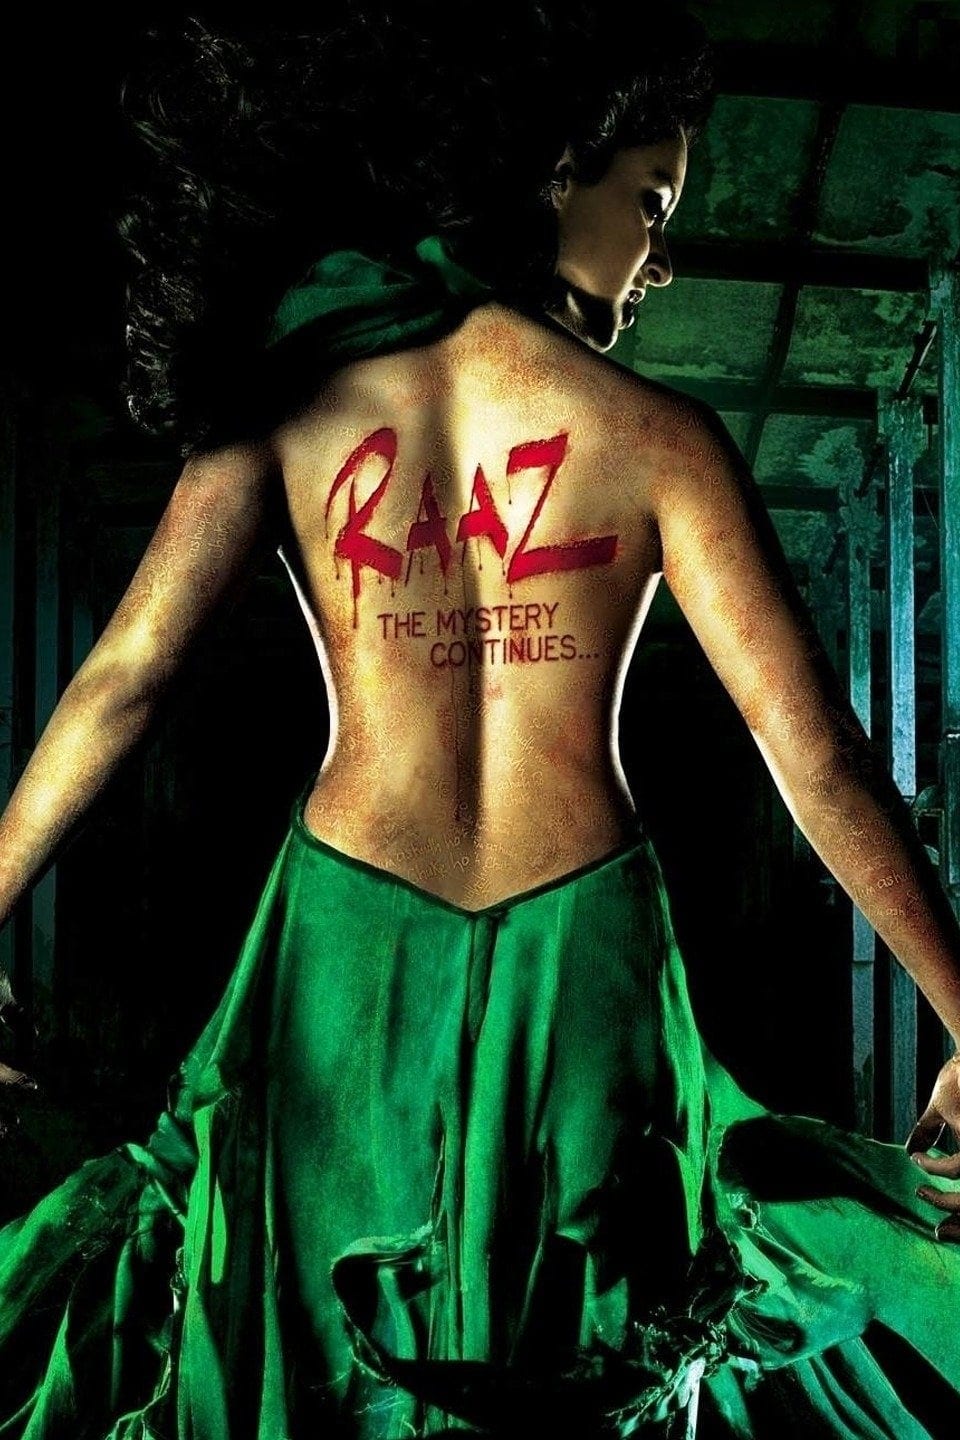 Poster for the movie "Raaz: The Mystery Continues..."